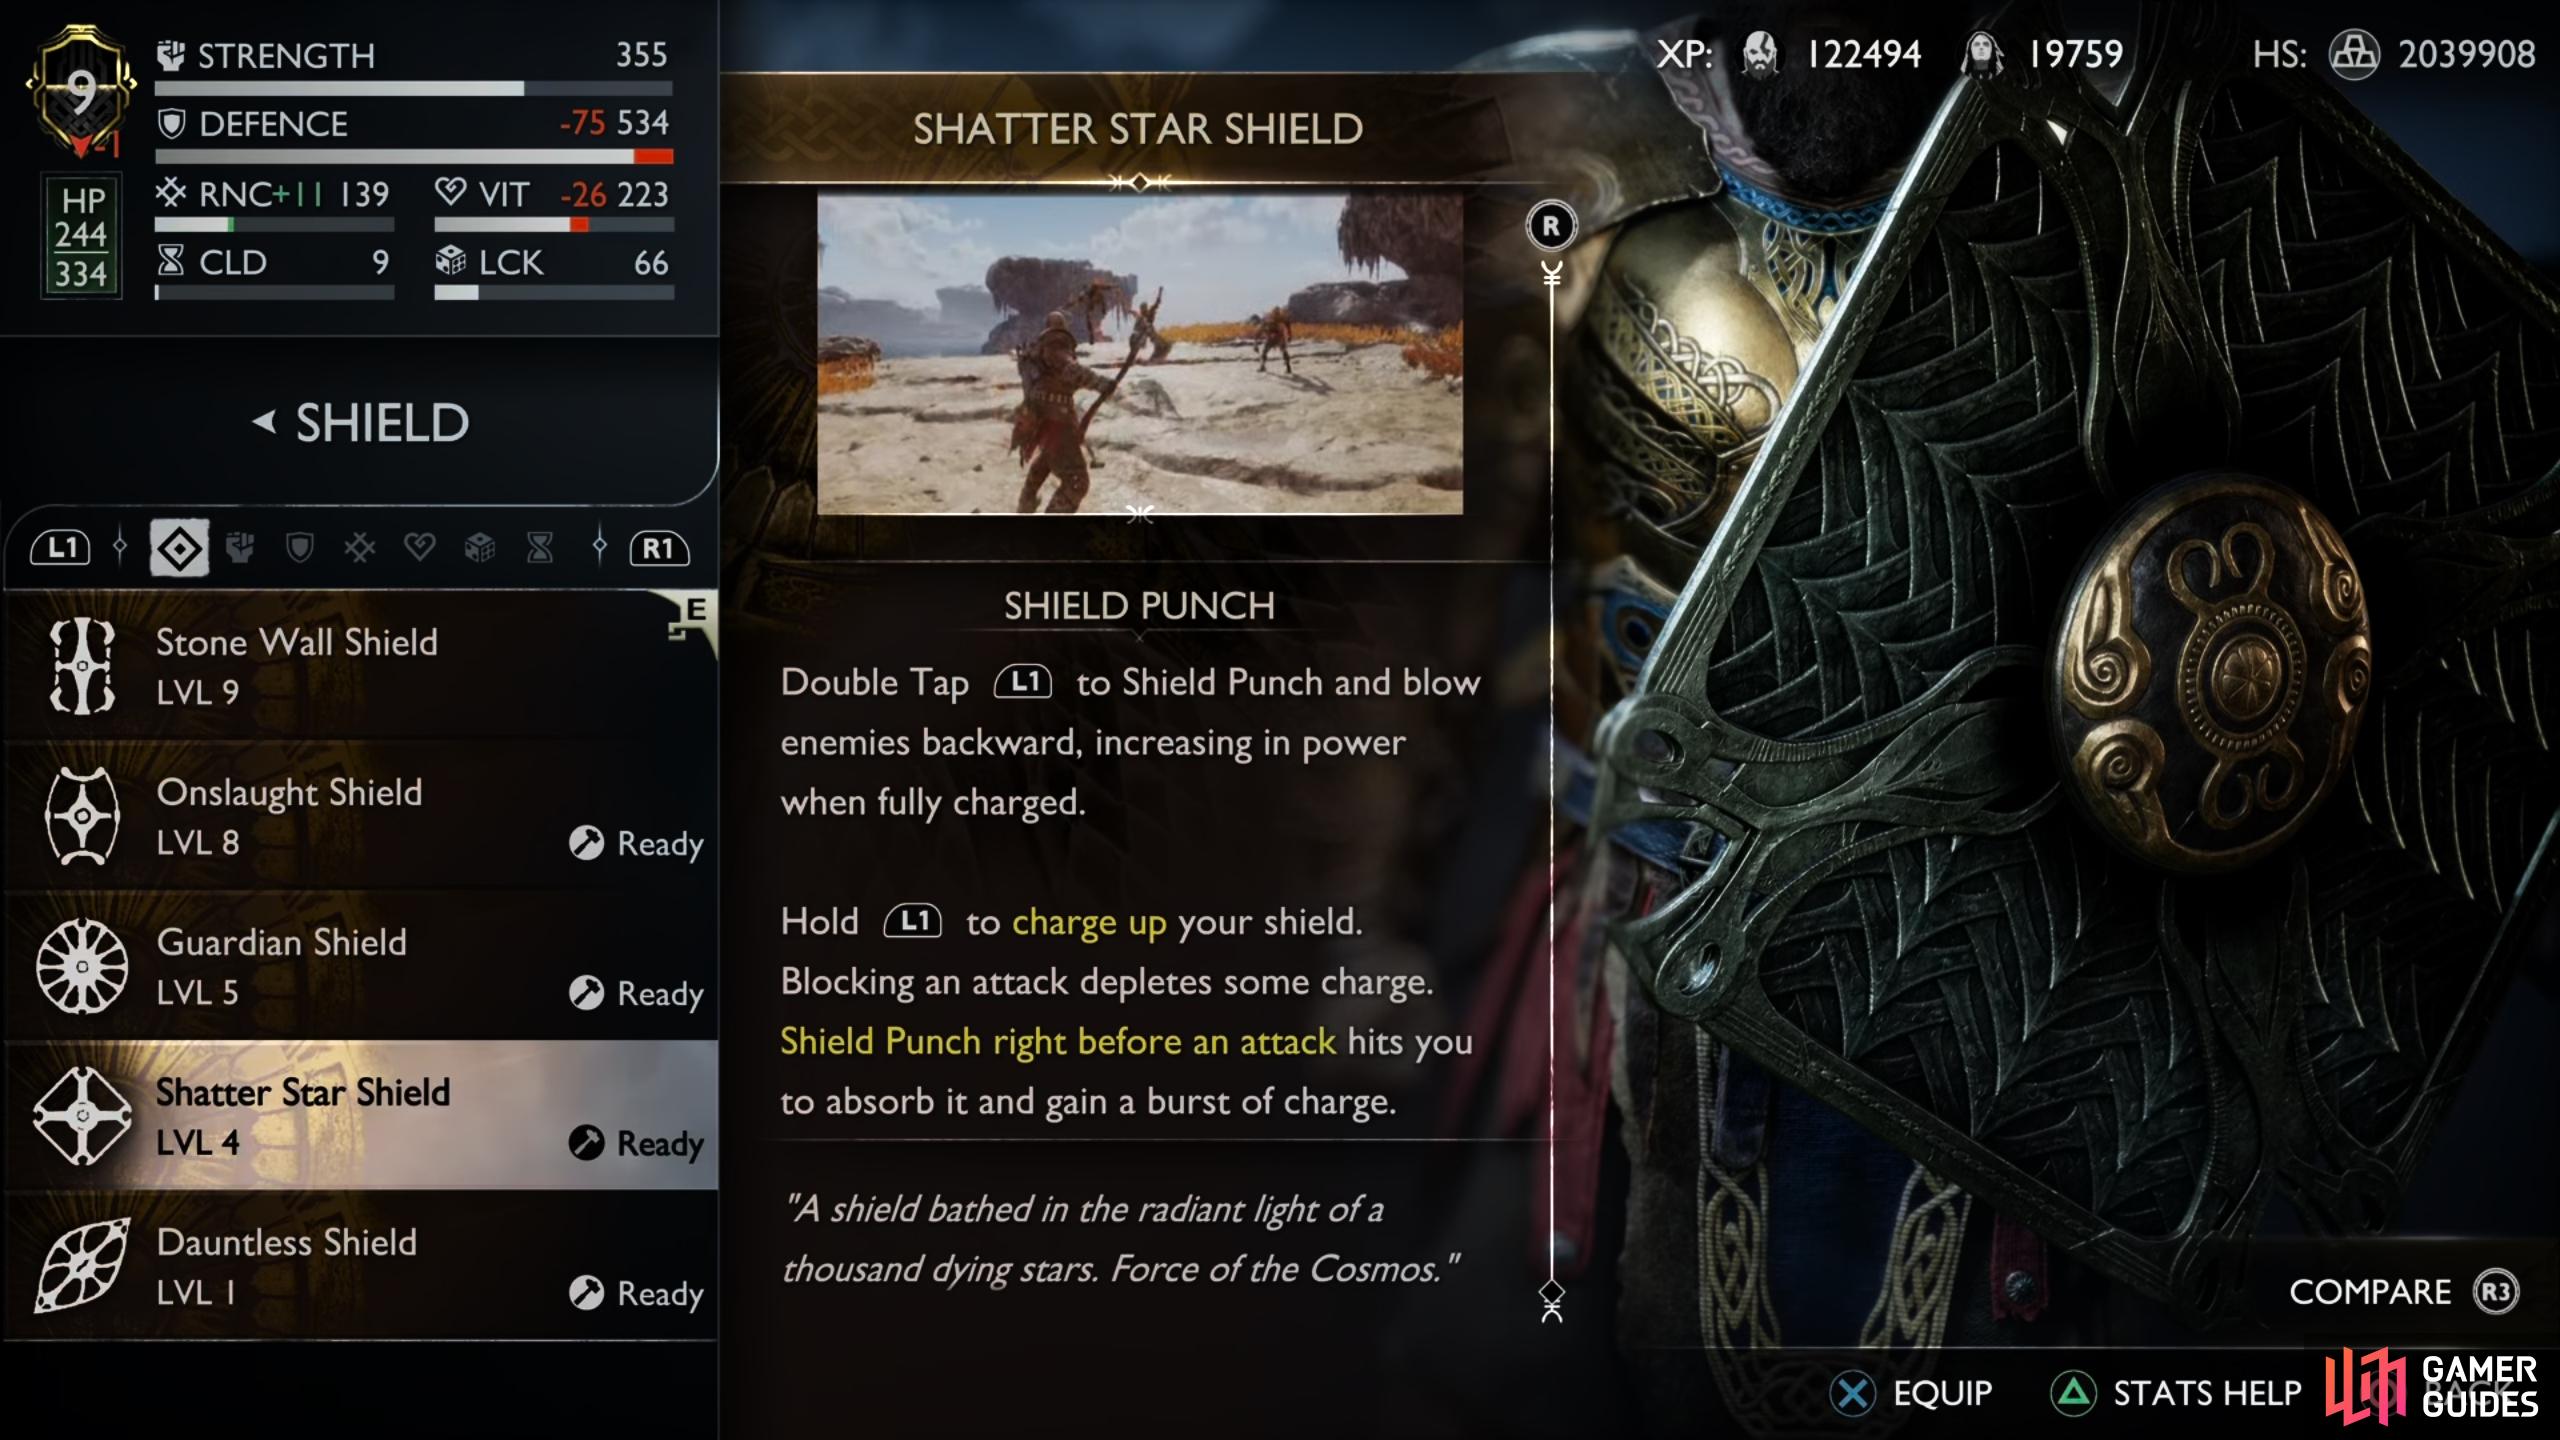 The Shatter Star Shield is found in the Legendary Chest at The Abandoned Village of Vanaheim.